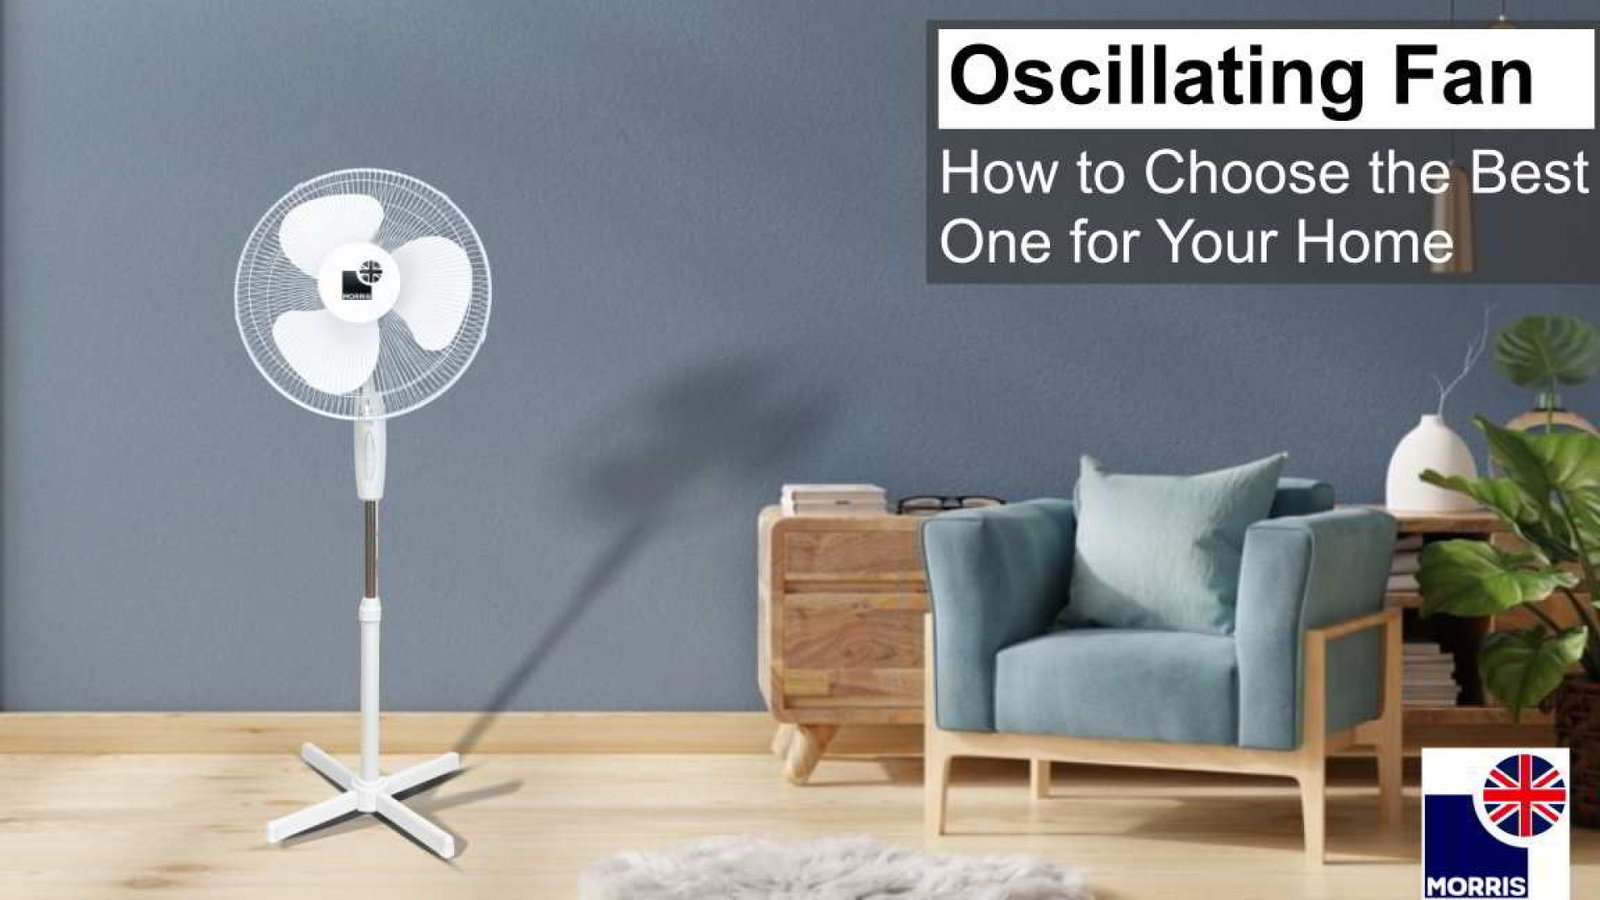 https://morrisdirect.co.uk/image/cache/catalog/Blog-posts/Morris-Fans/Oscillating-fan/Morris-oscillating-fan-how-to-choose-the-best-one-for-your-home-1920x1080.jpg